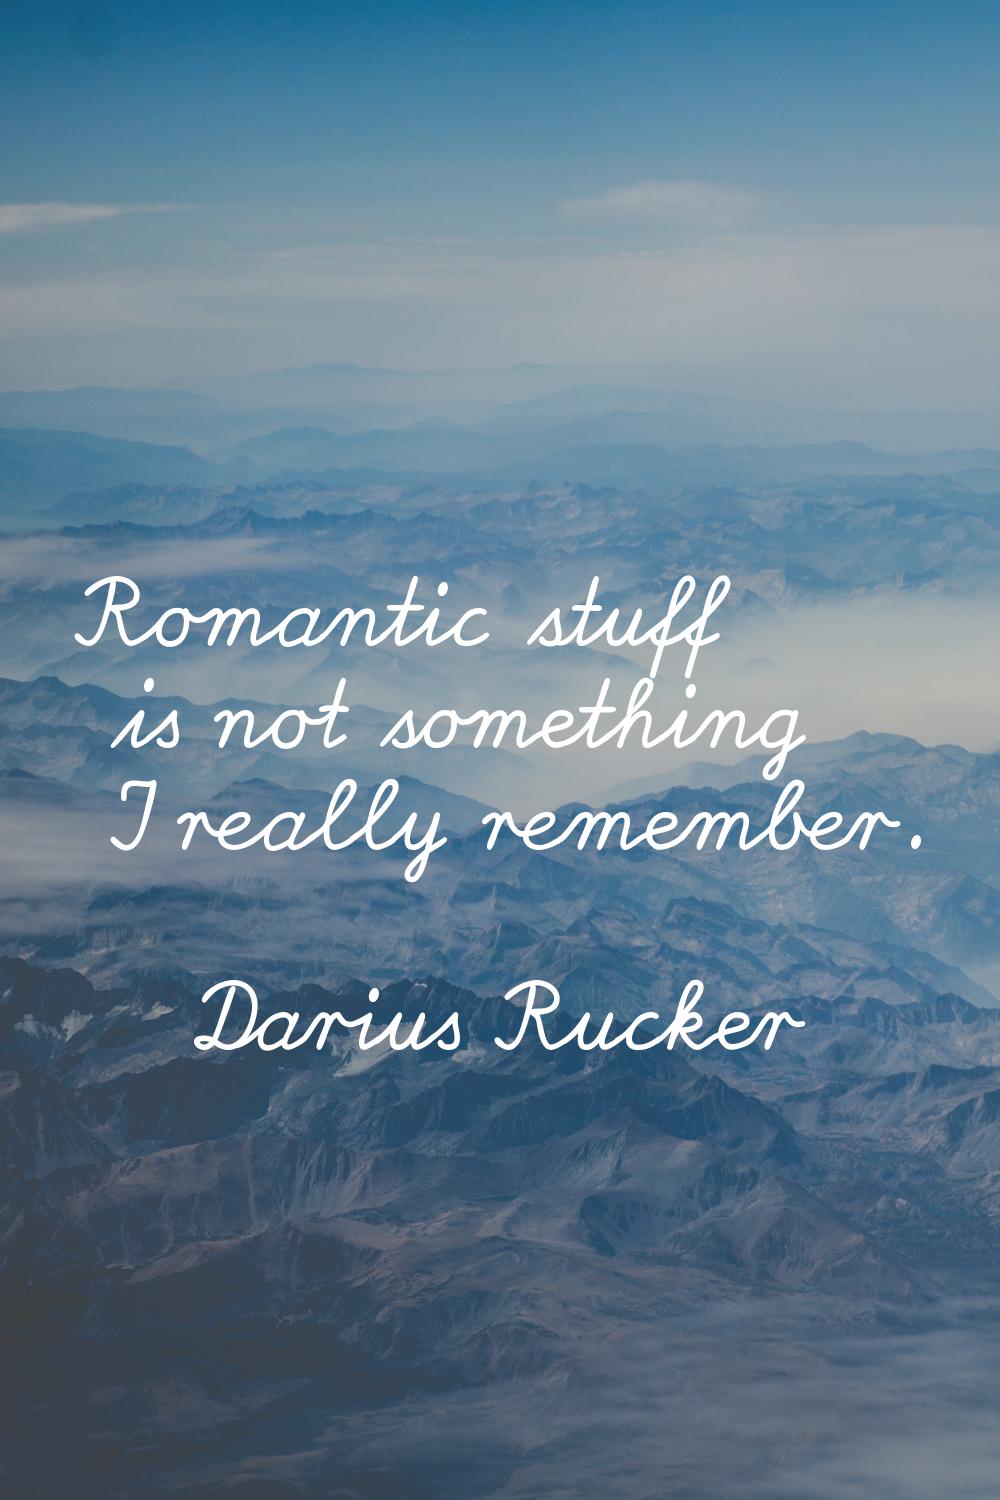 Romantic stuff is not something I really remember.